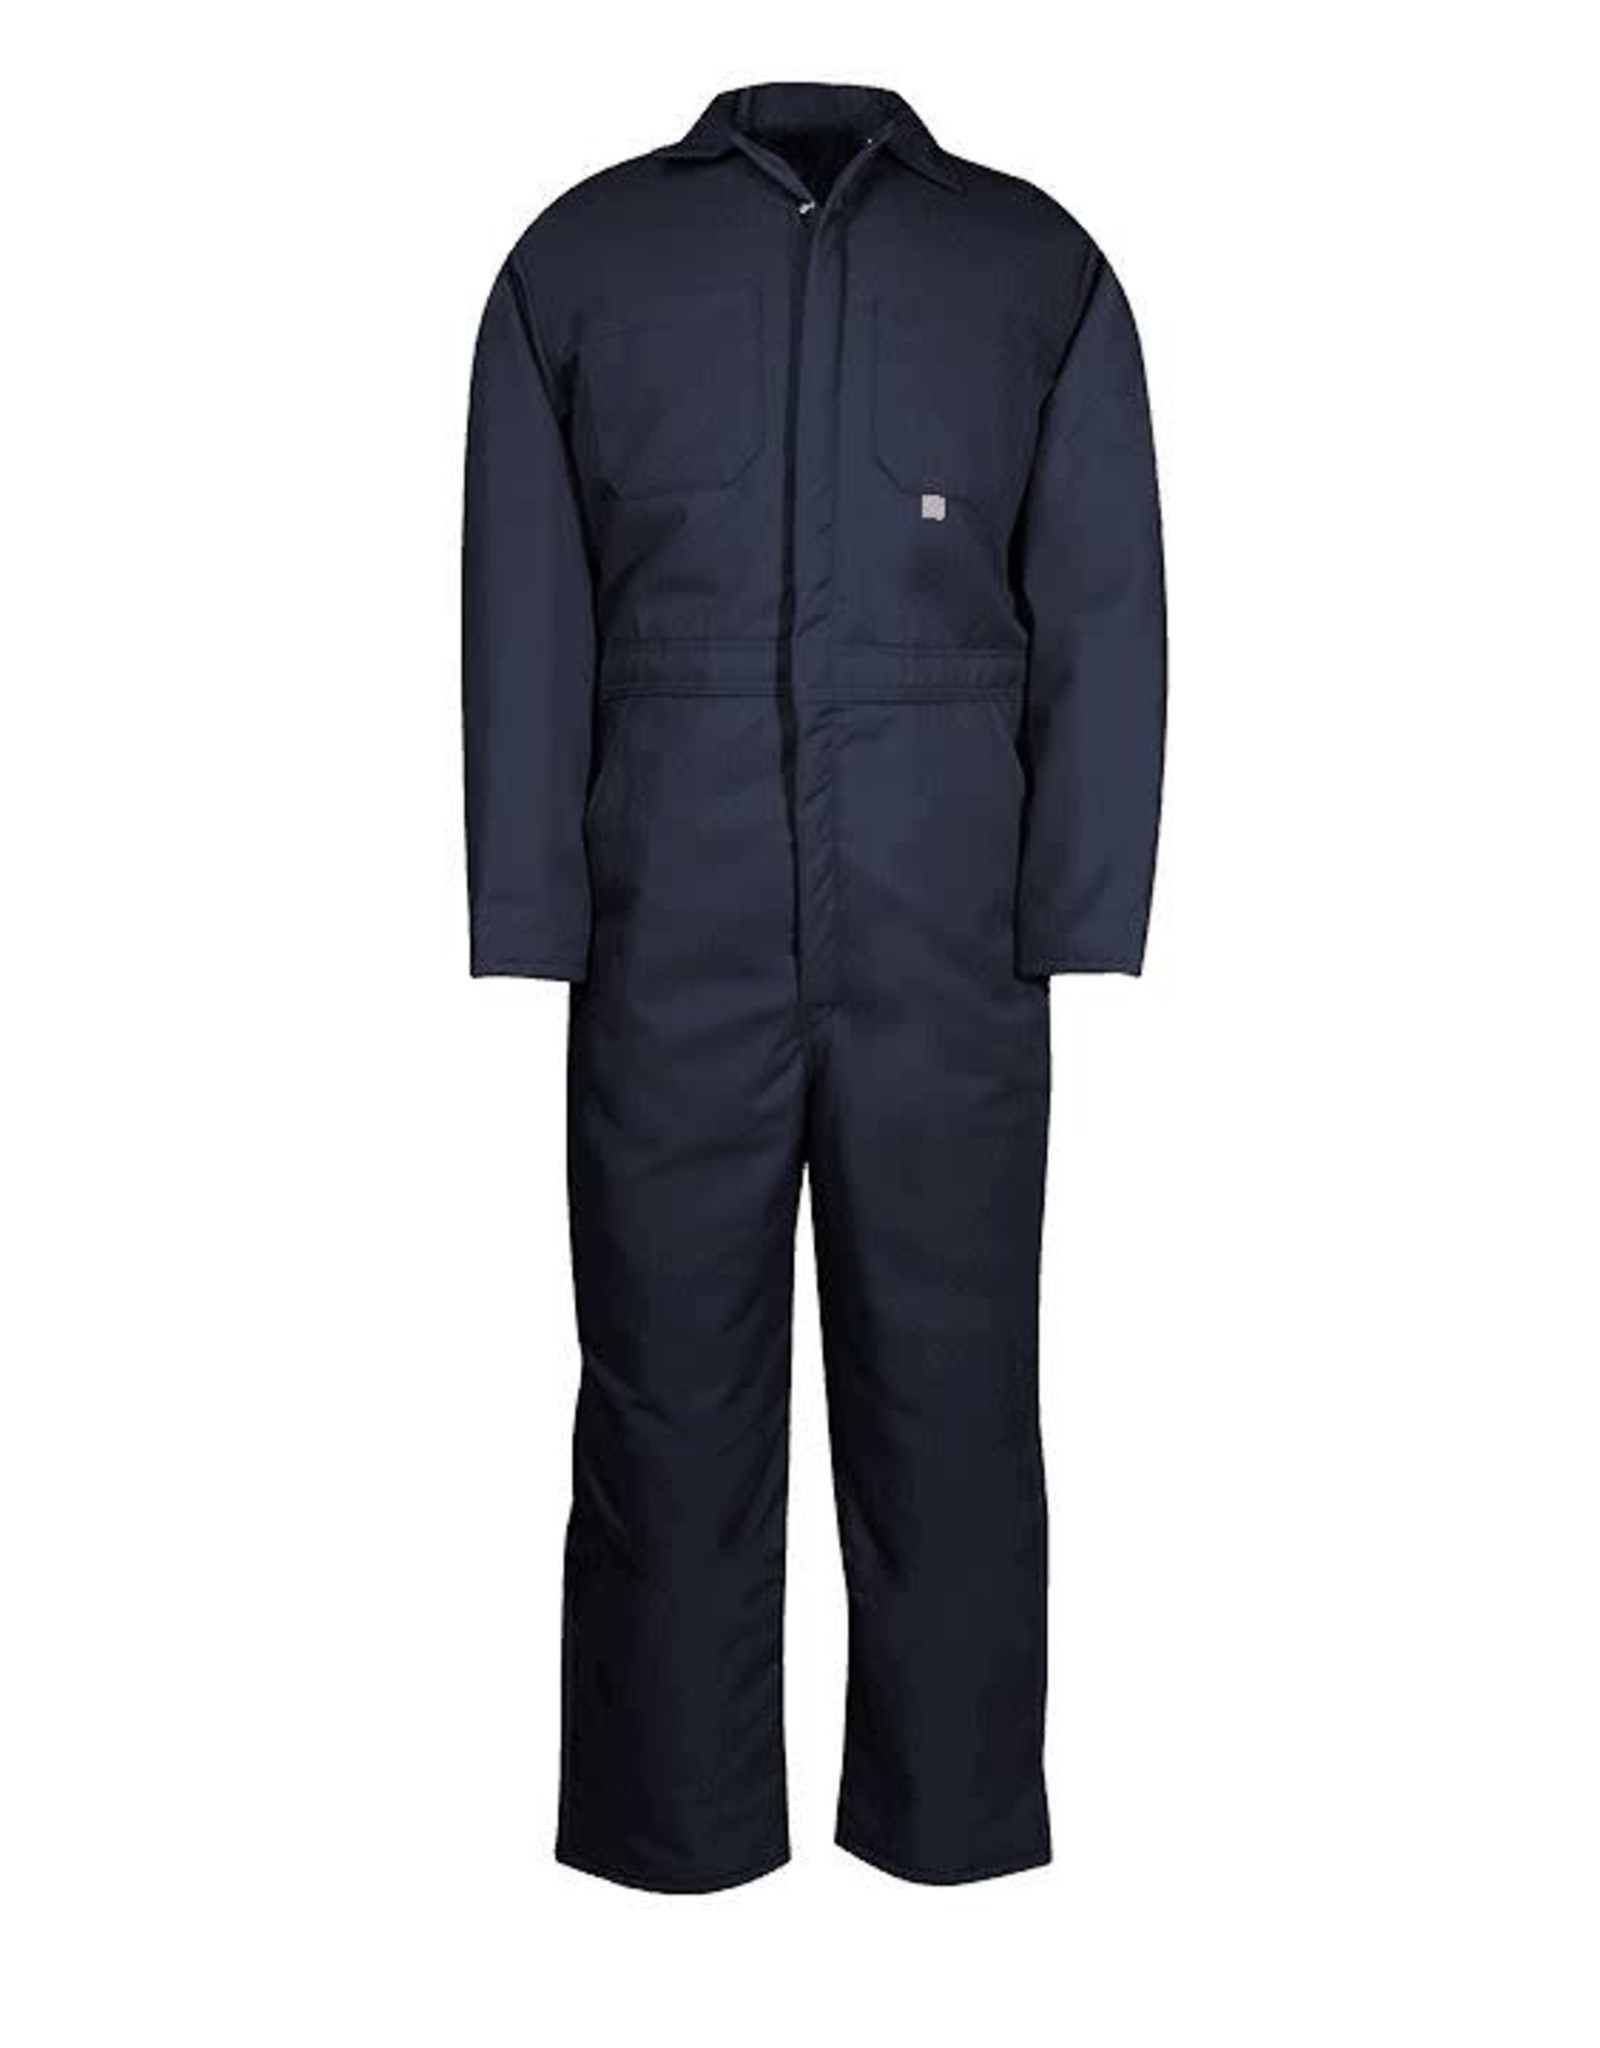 Big Bill Quilted/Insulated Coverall, Navy